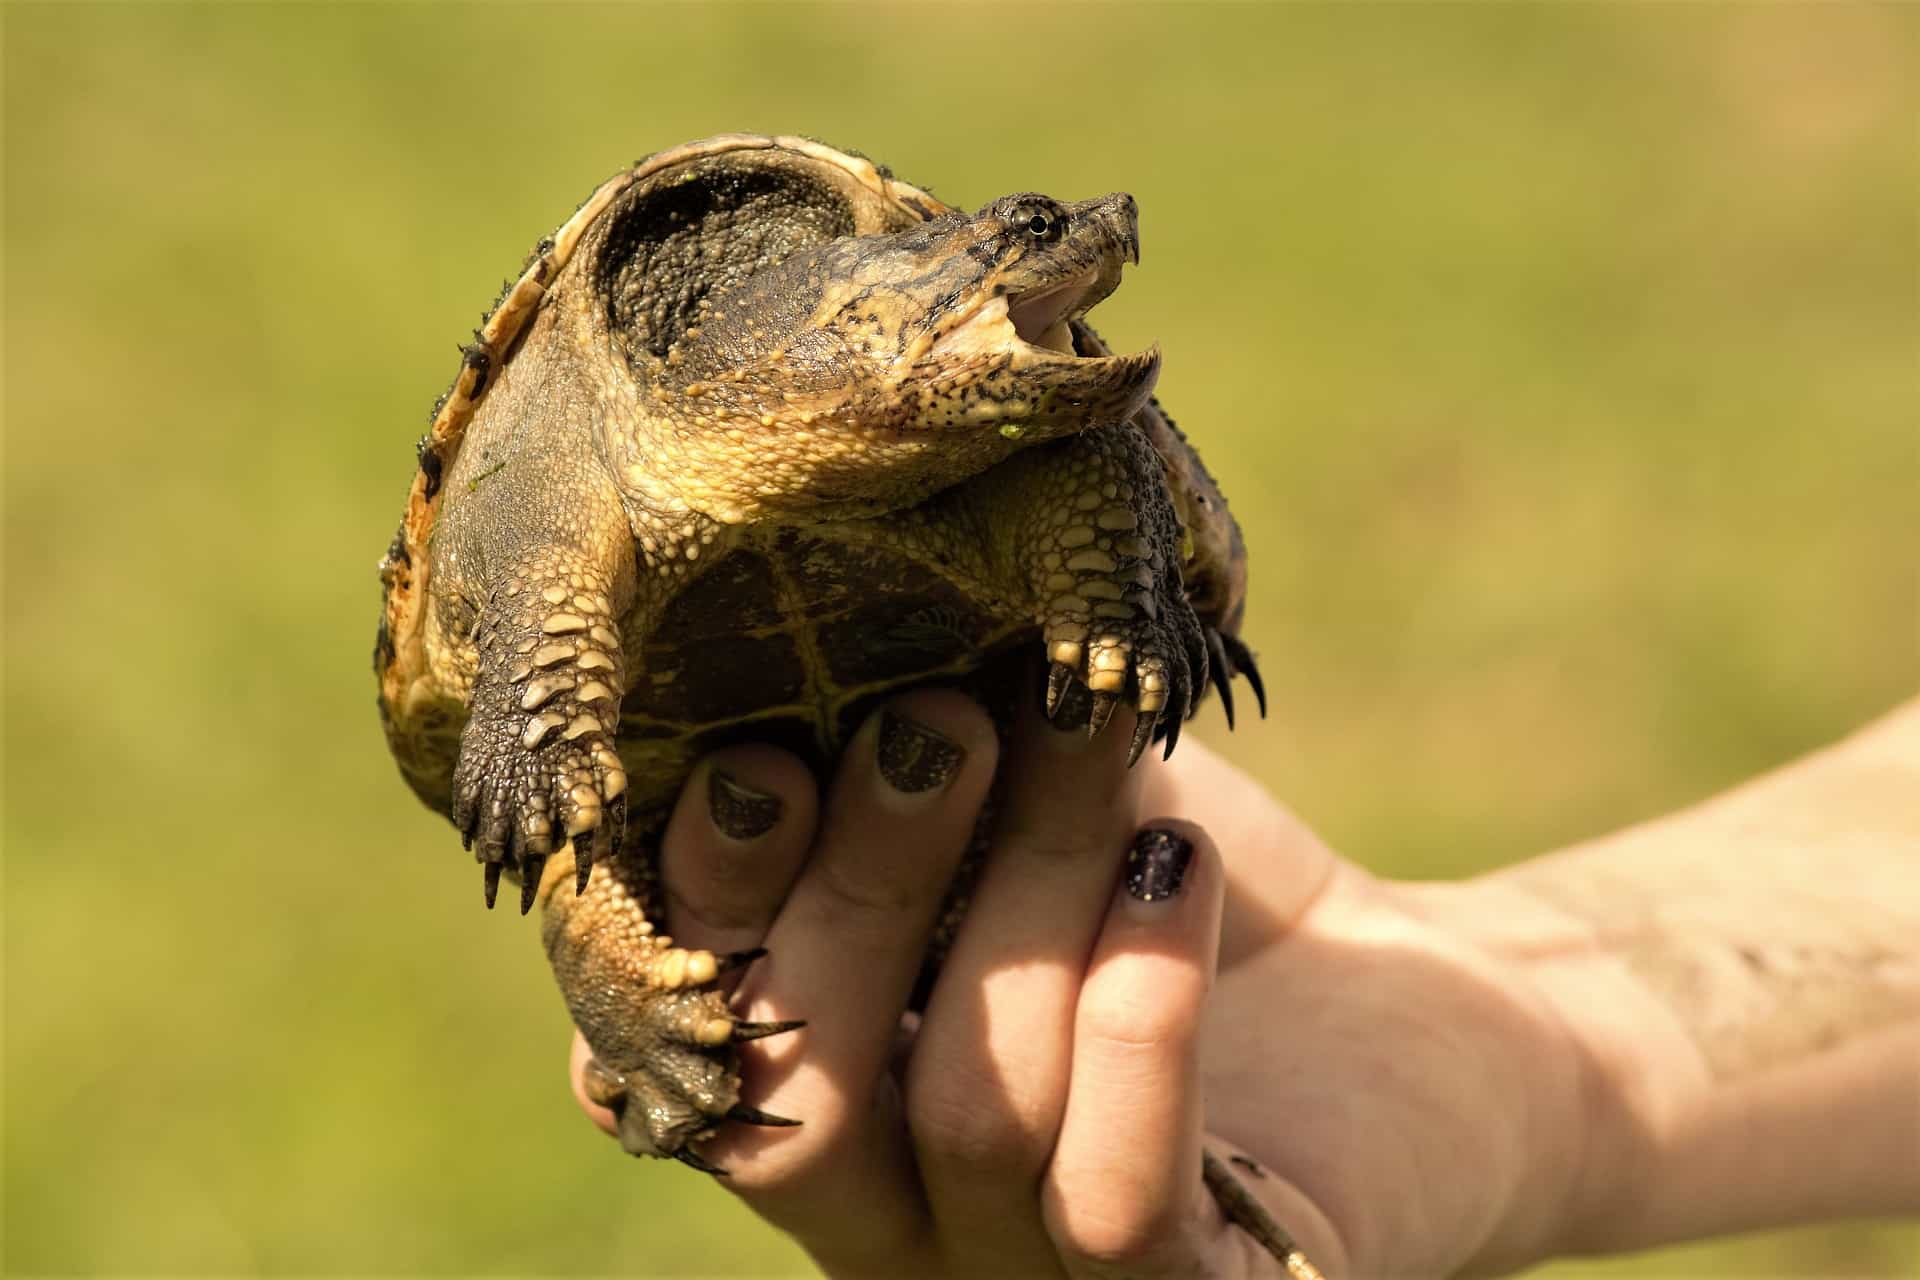 Can You Tame a Snapping Turtle? What You Need to Know Before You Try